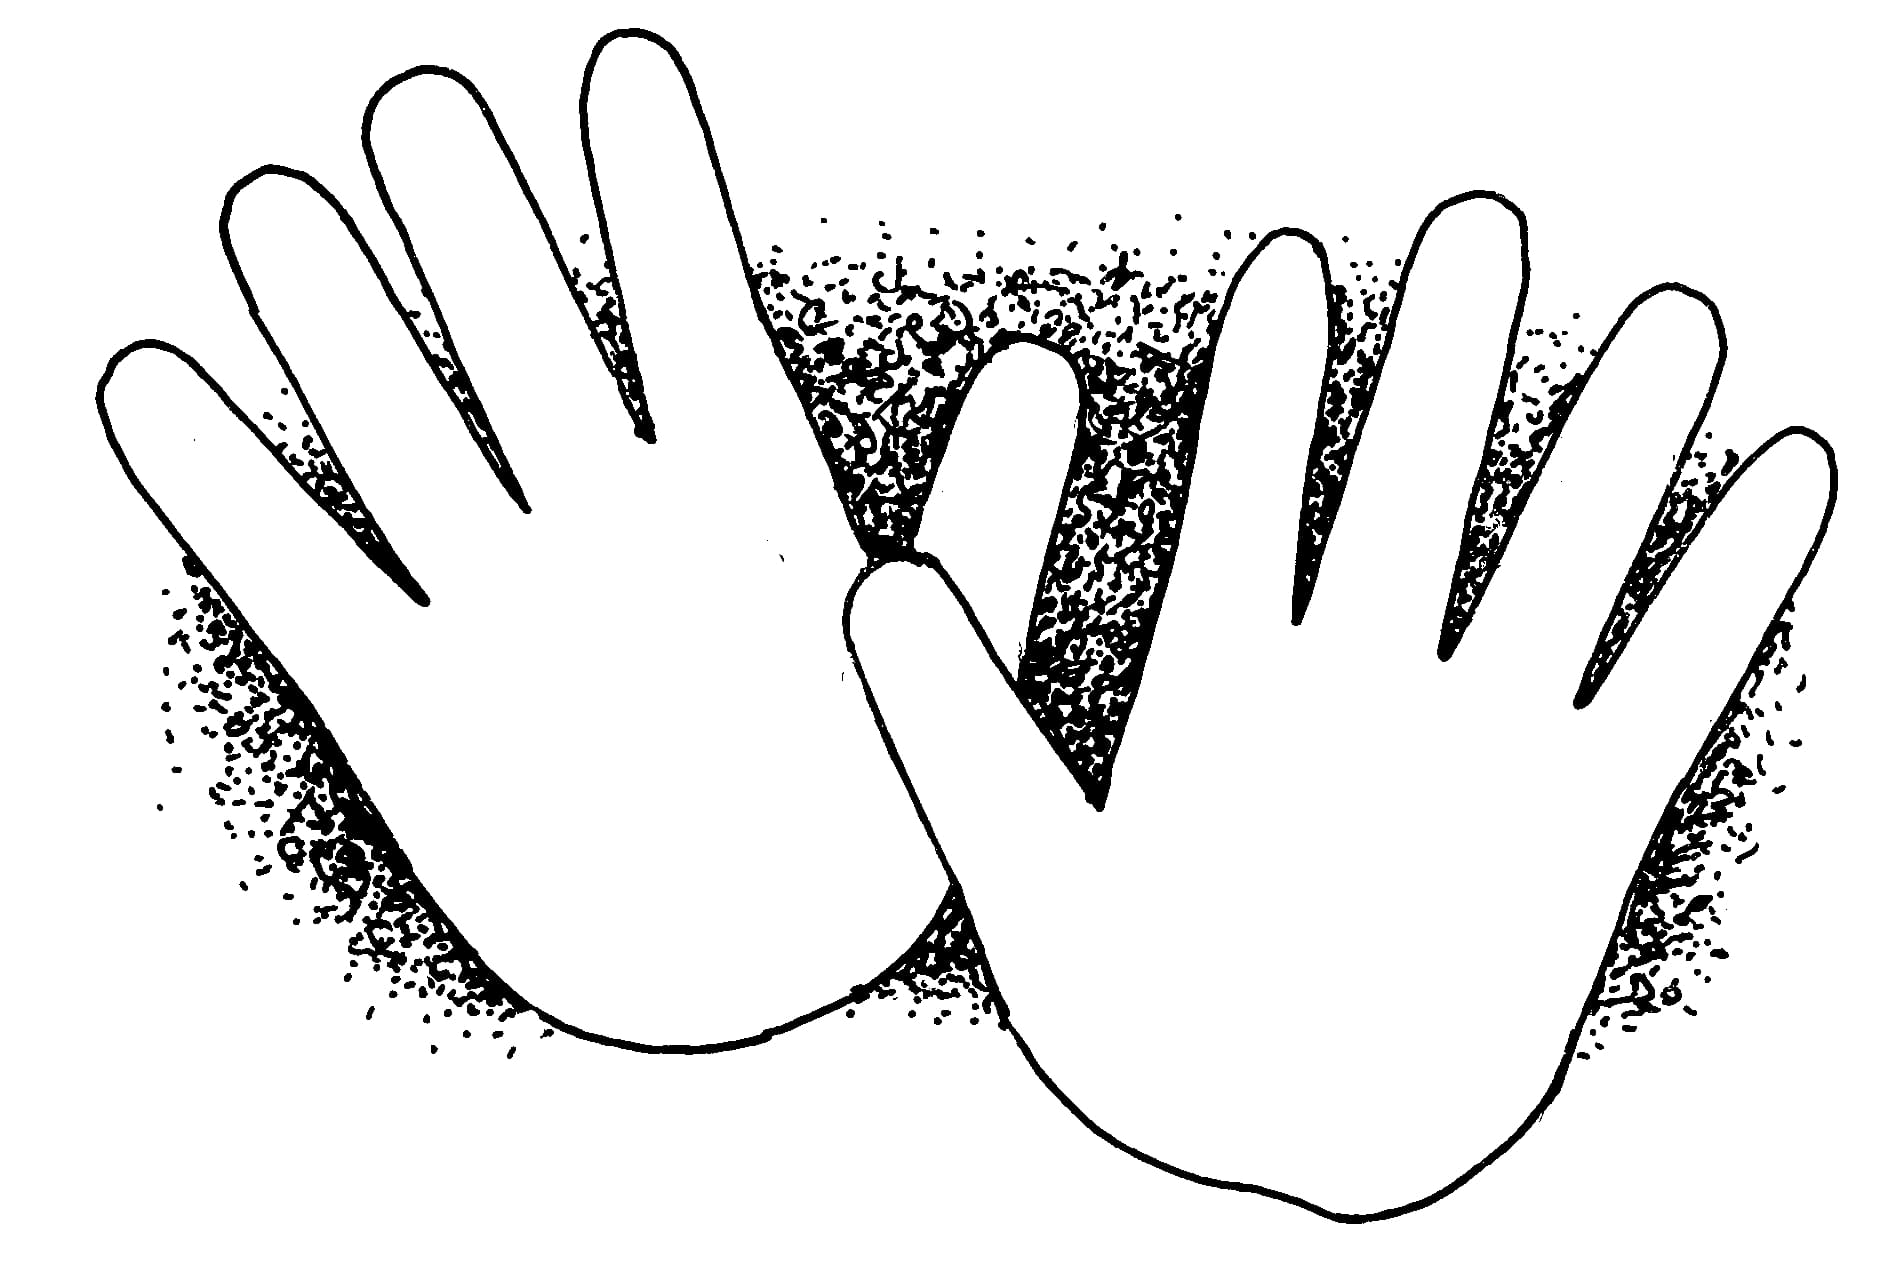 Helping Hands Clip Art Black and White Coloring Page